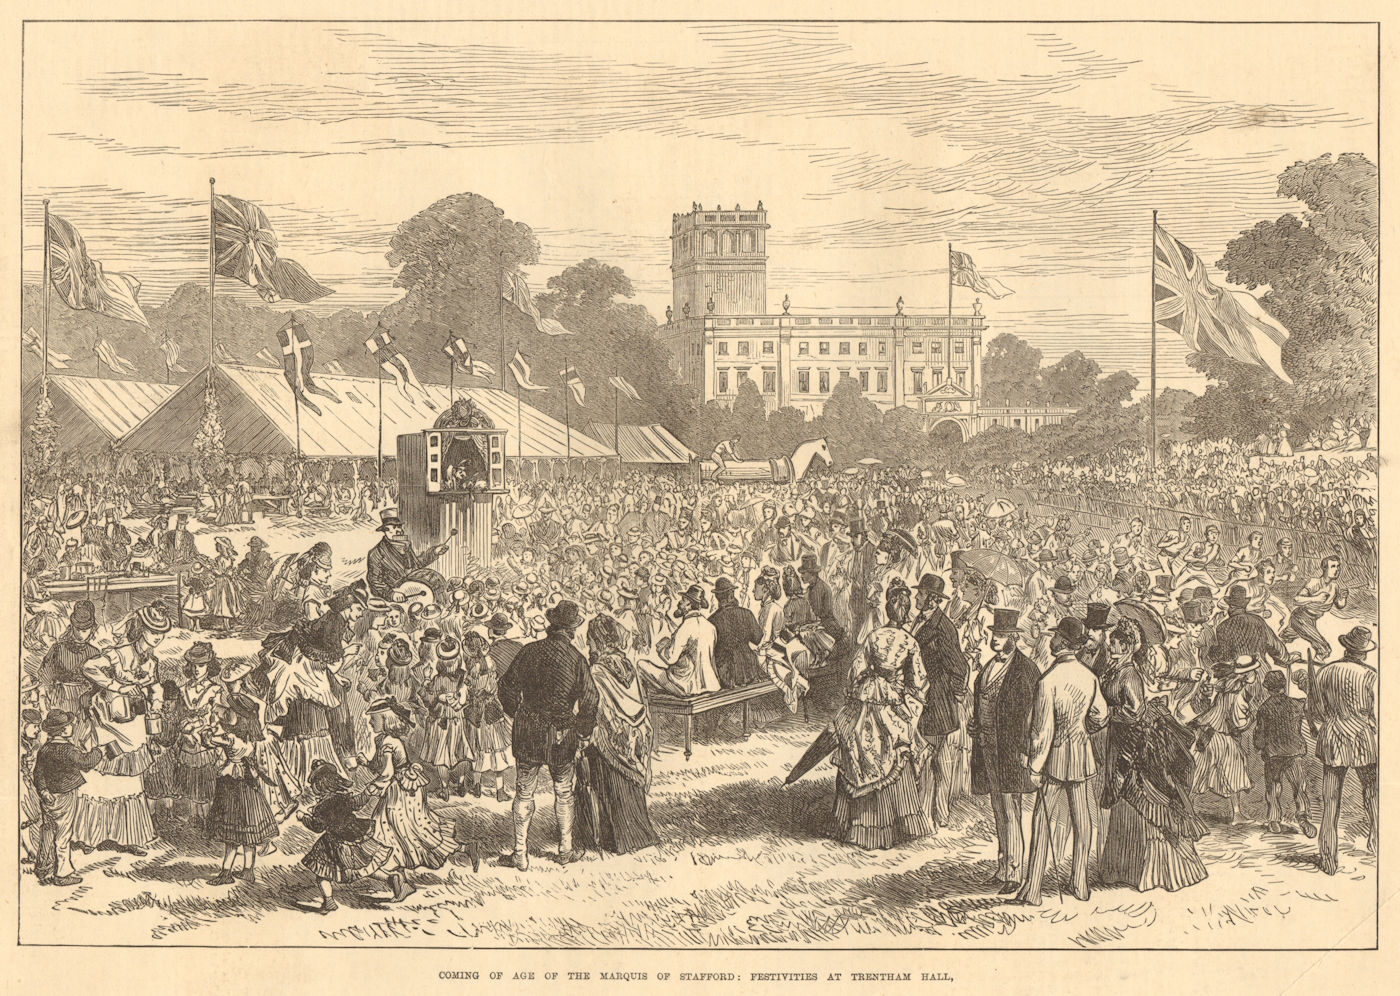 Associate Product Marquis of Stafford's coming of age Trentham Hall festivities Staffordshire 1872